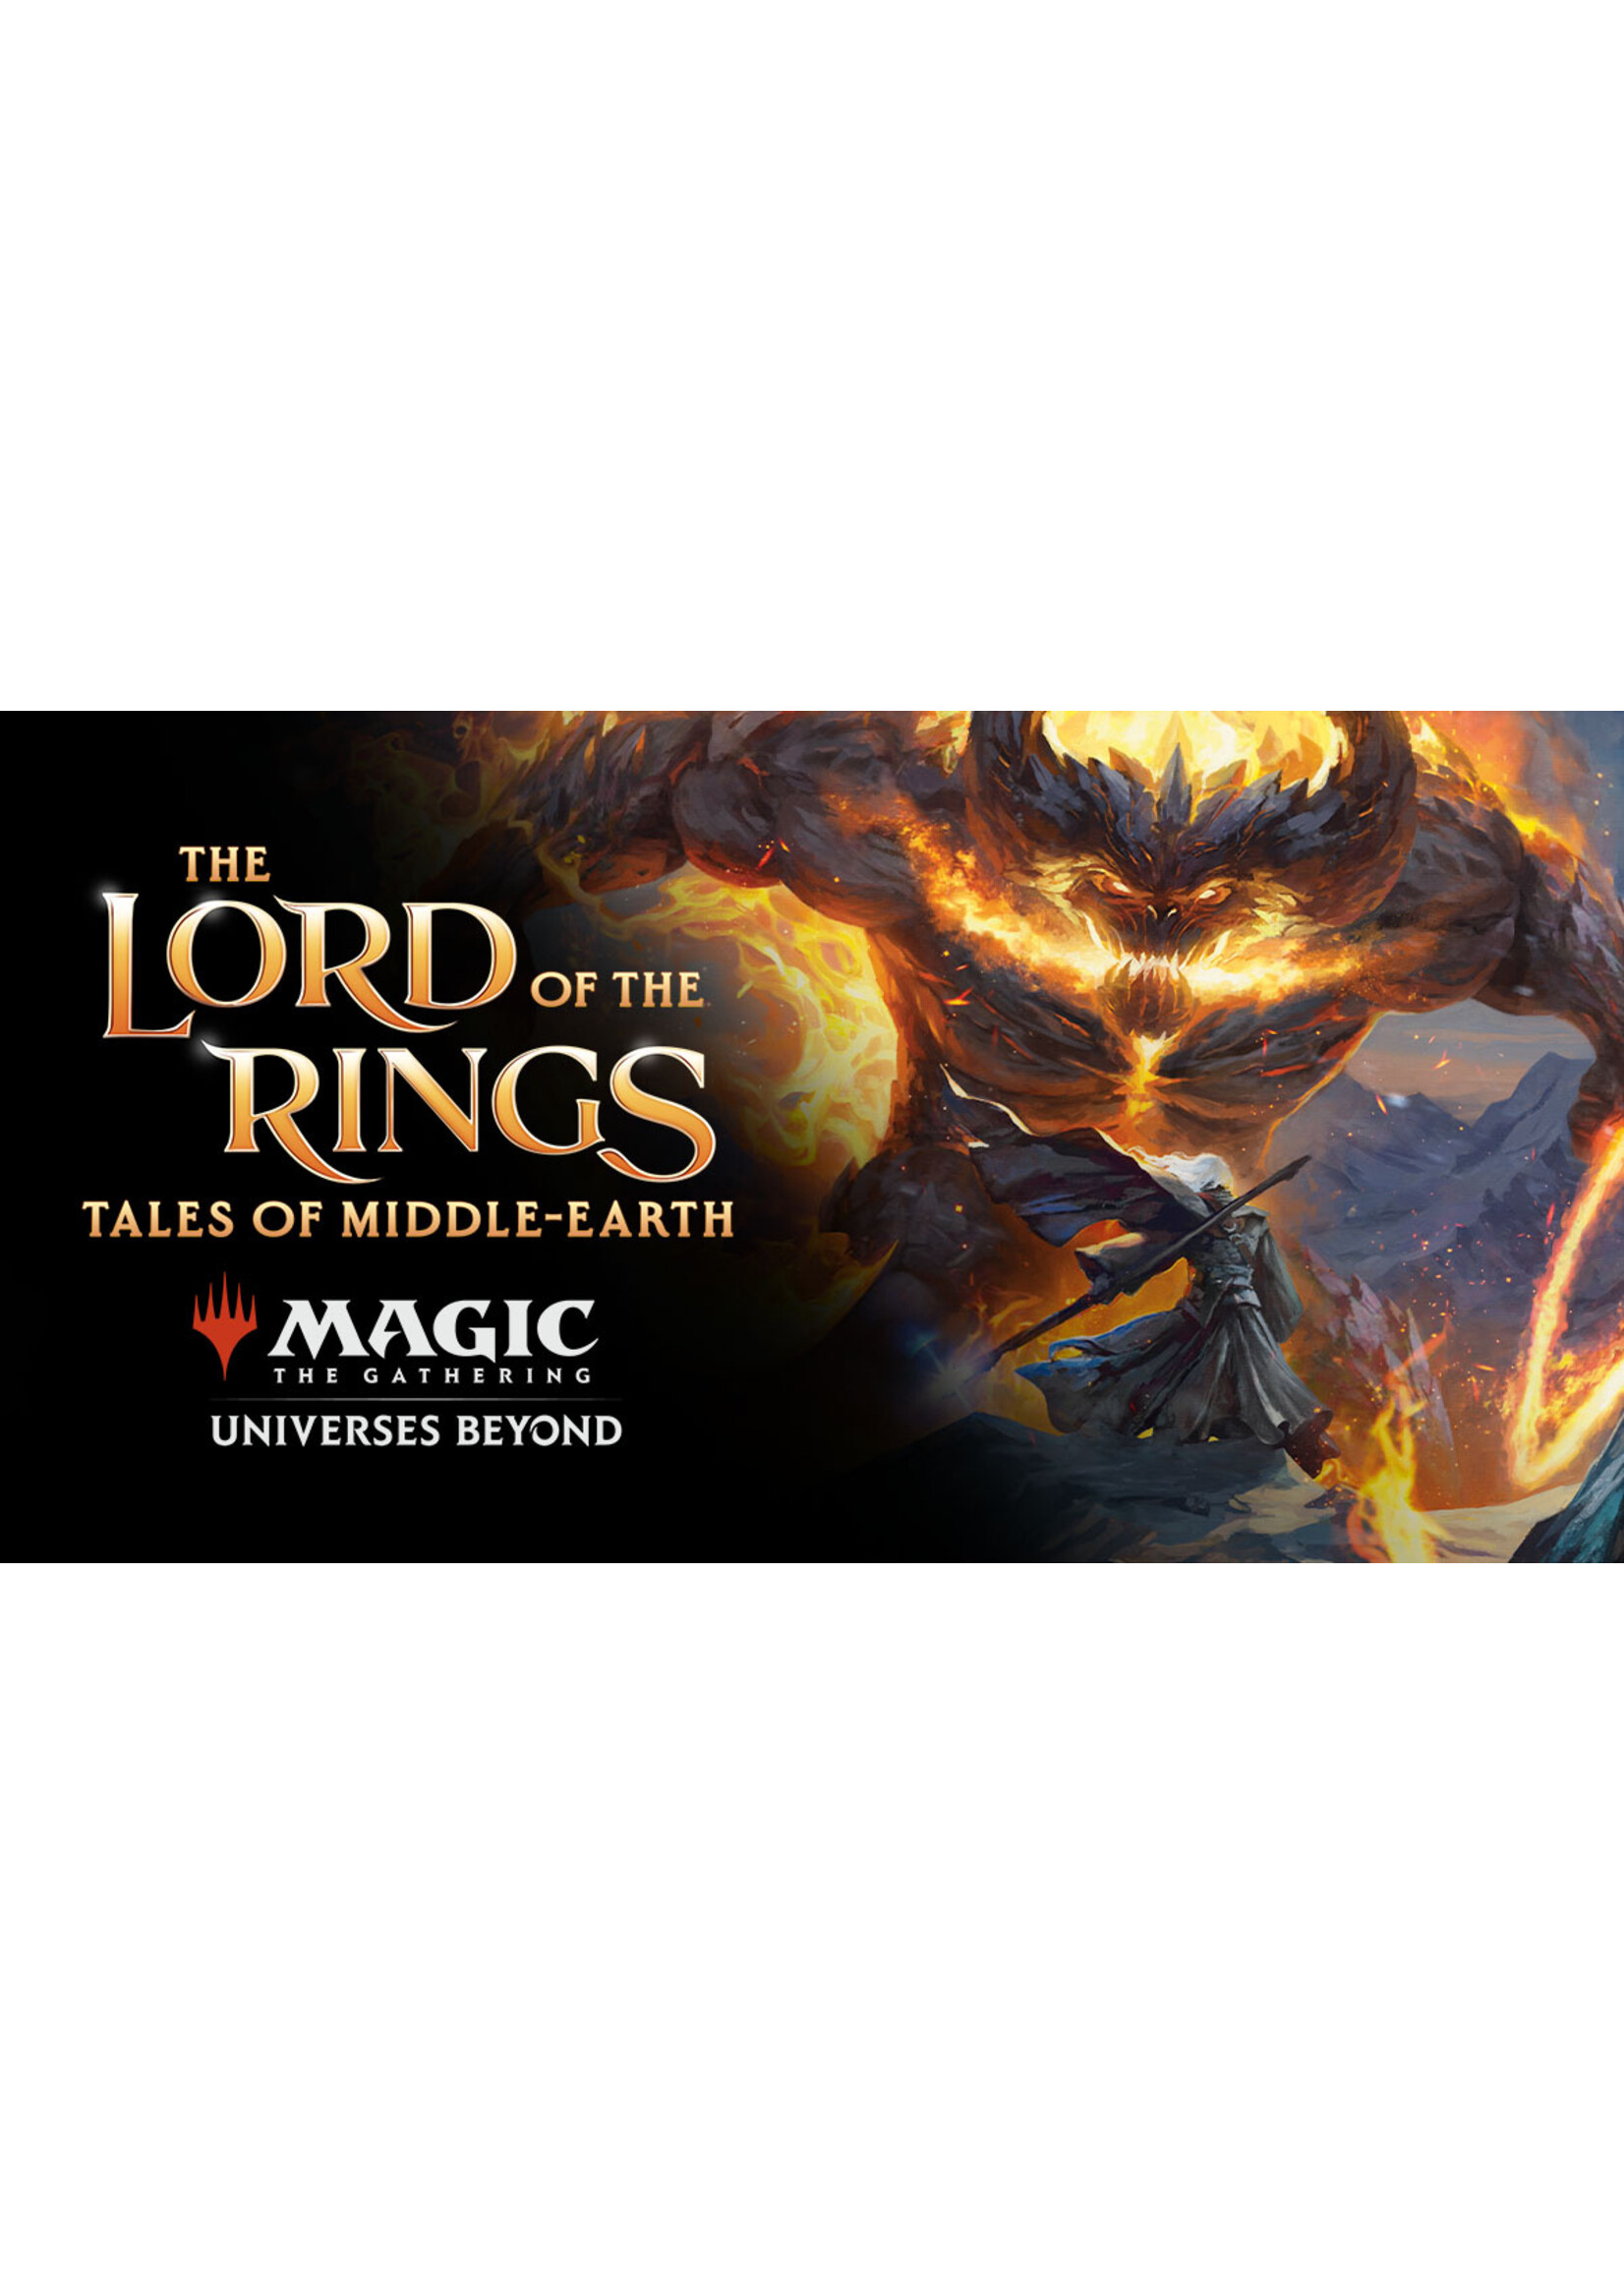 Wizards of the Coast In-Store Gaming: MtG Lord of the Rings Prerelease